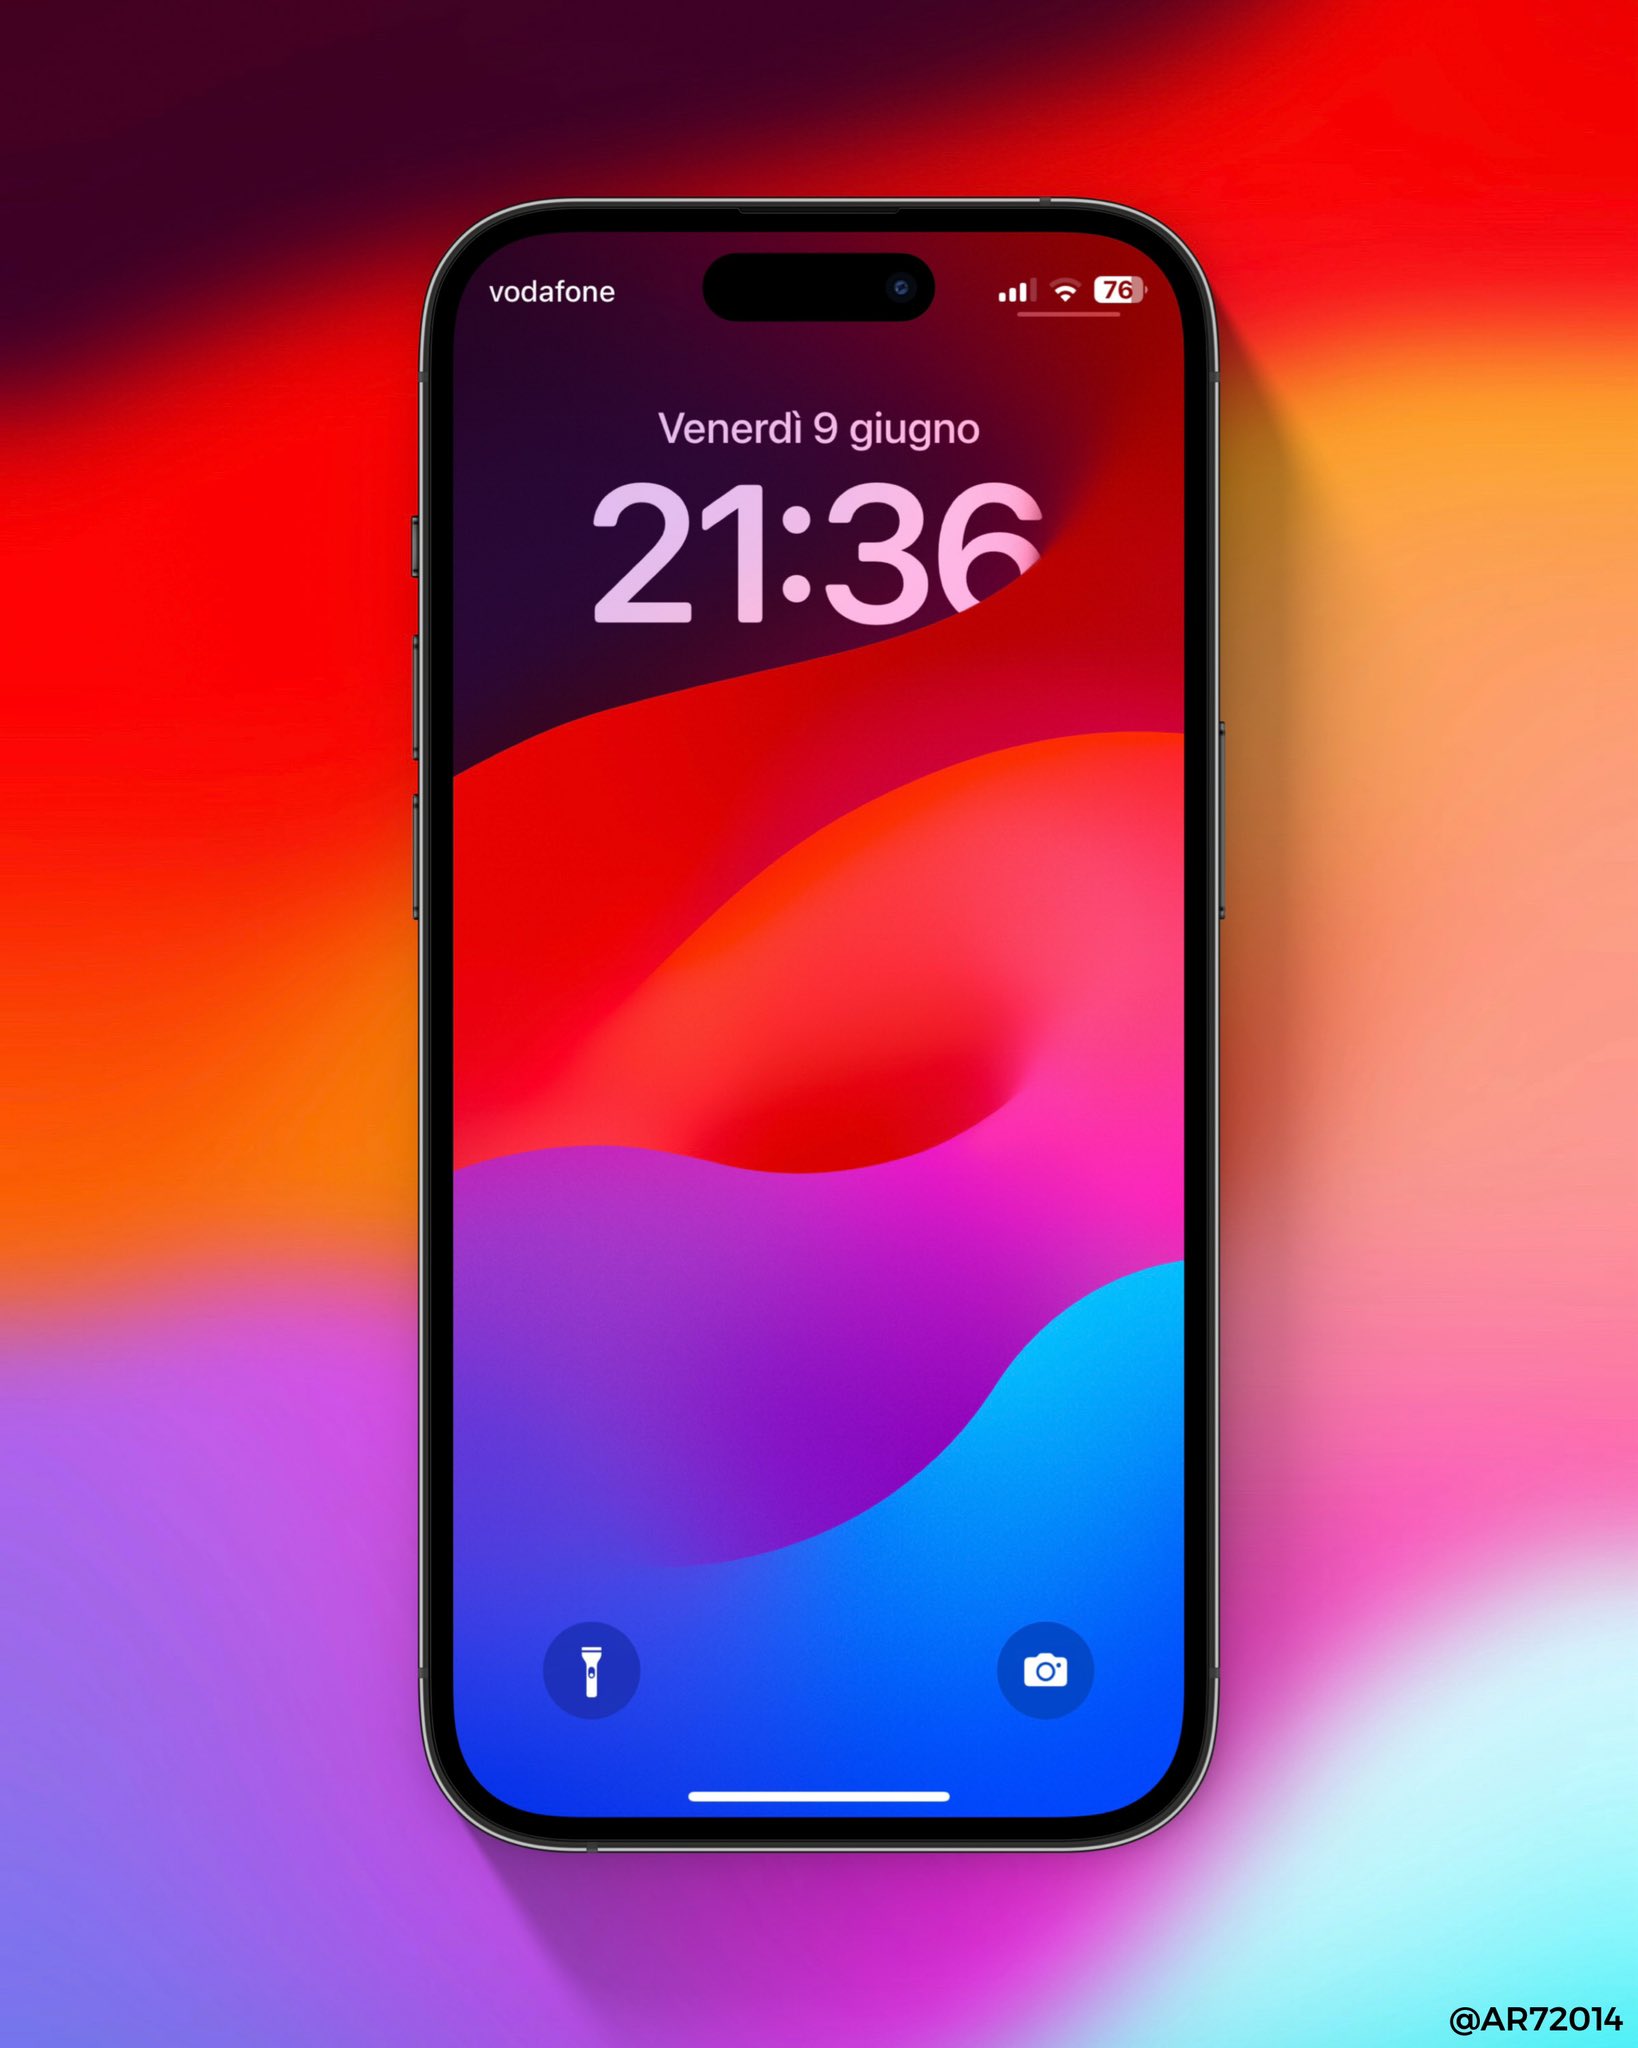 Enhance your iPhone's Dark Mode with these wallpapers